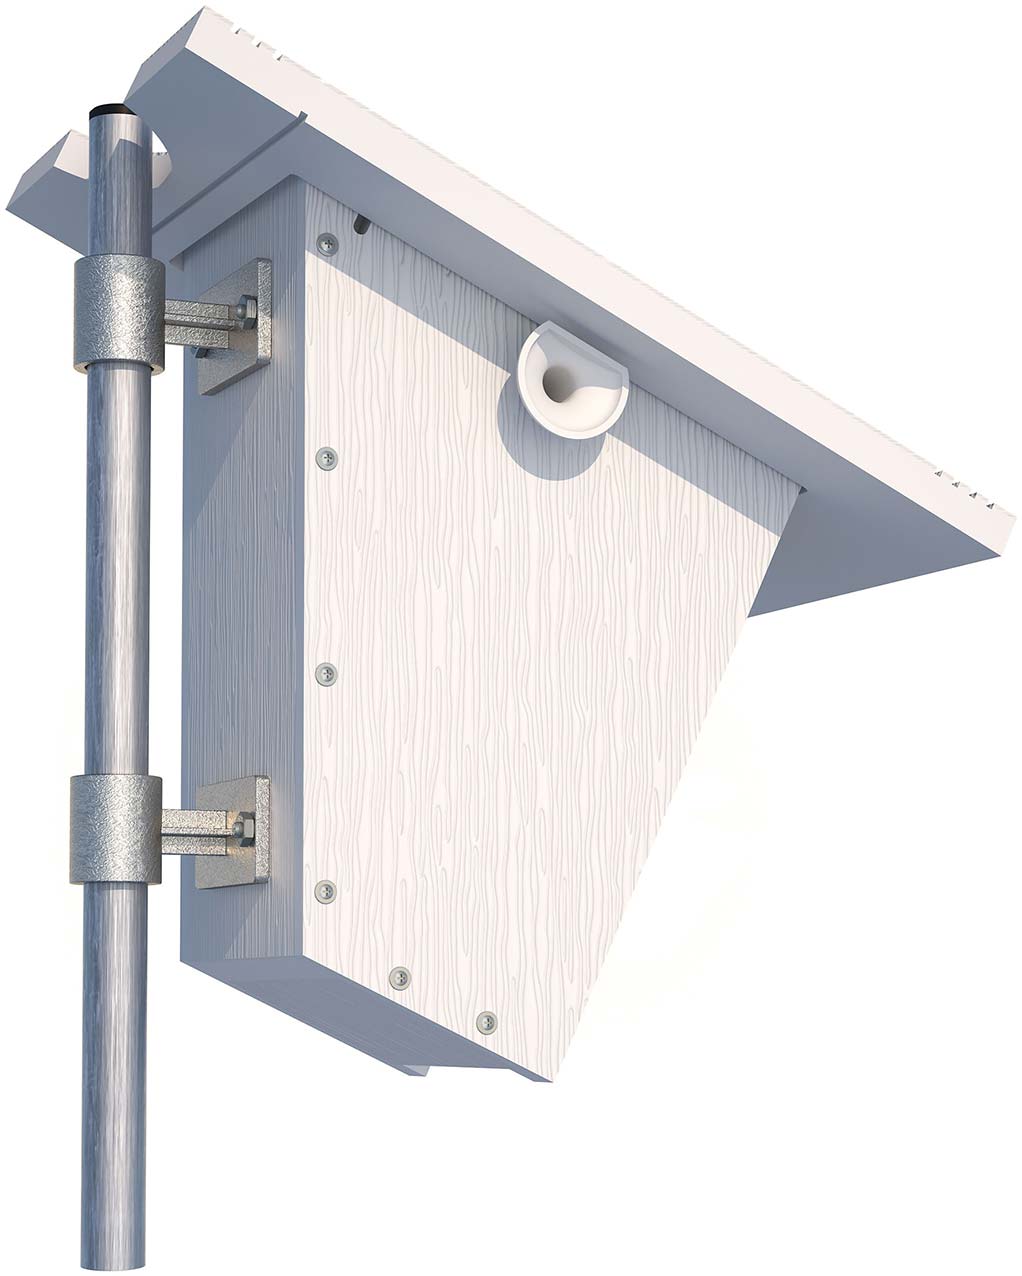 Image illustrating how the nest box mounts and slides on a pipe.